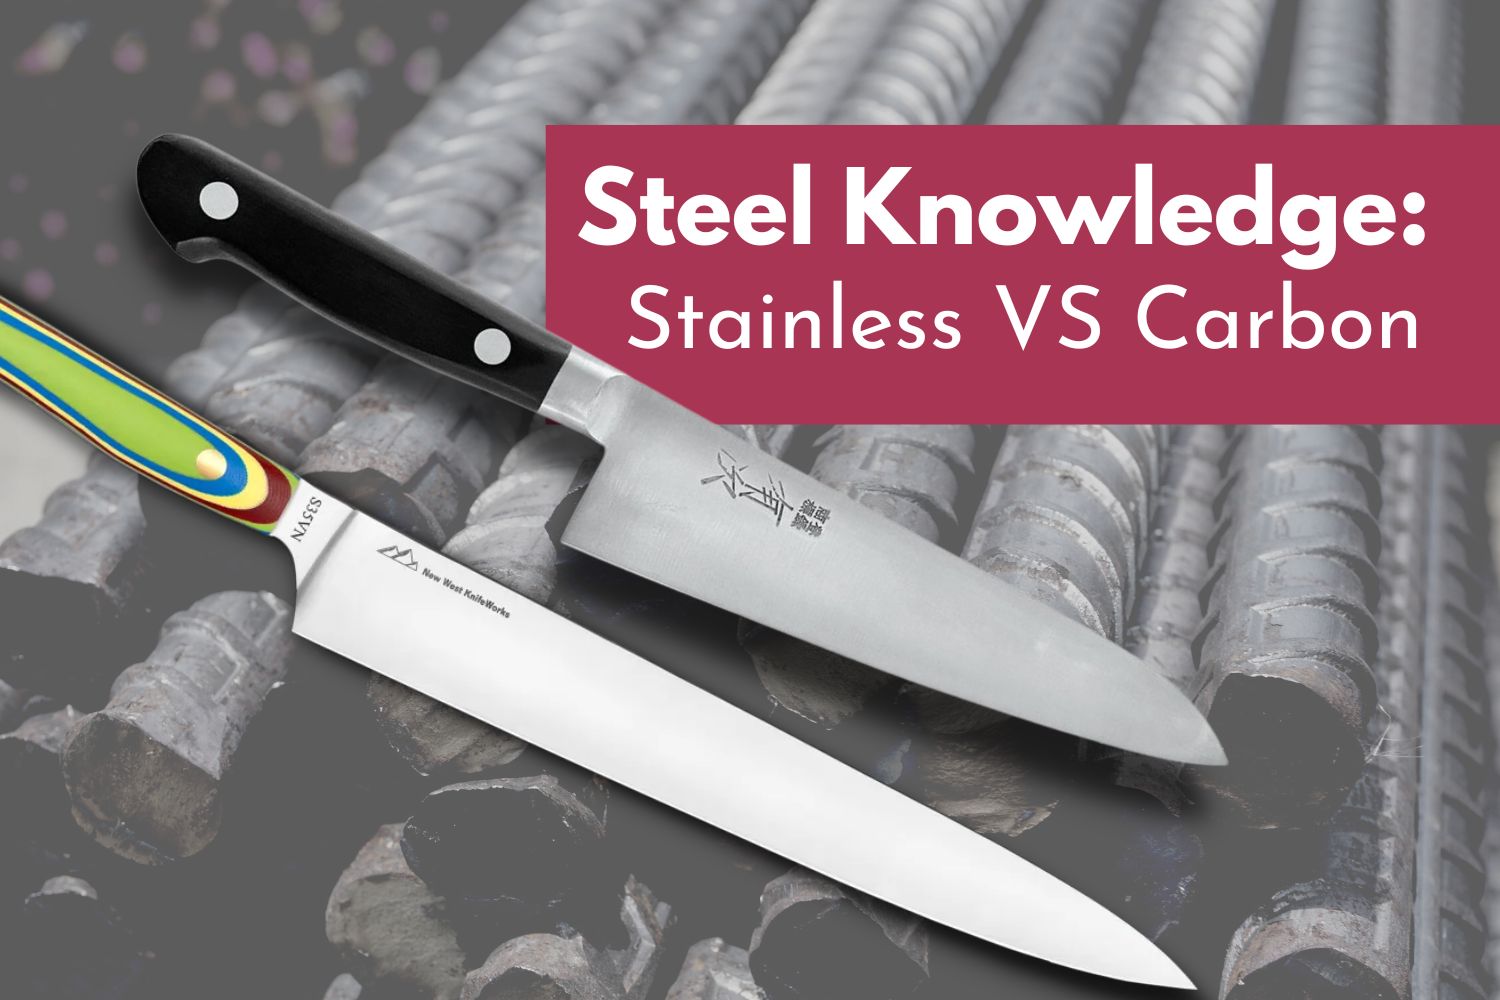 Ceramic, Stainless Steel or Carbon Steel: Which Type of Knife is Best?